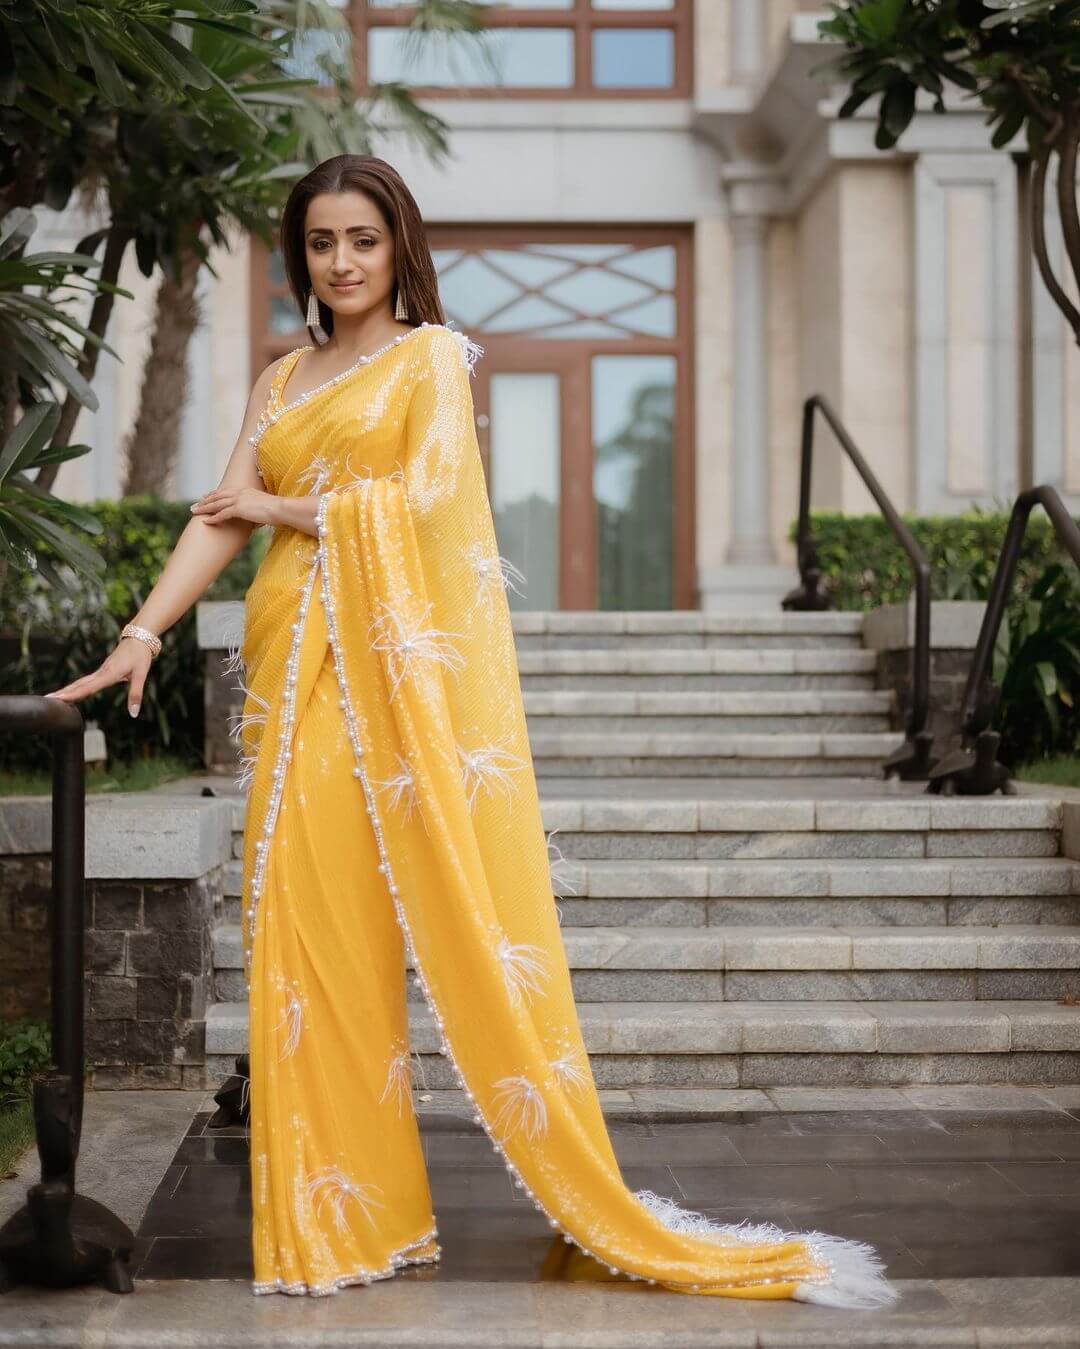 Trisha Krishnan Look Beautiful In Yellow Sequinned Saree With Perl Embedded Border & Blouse